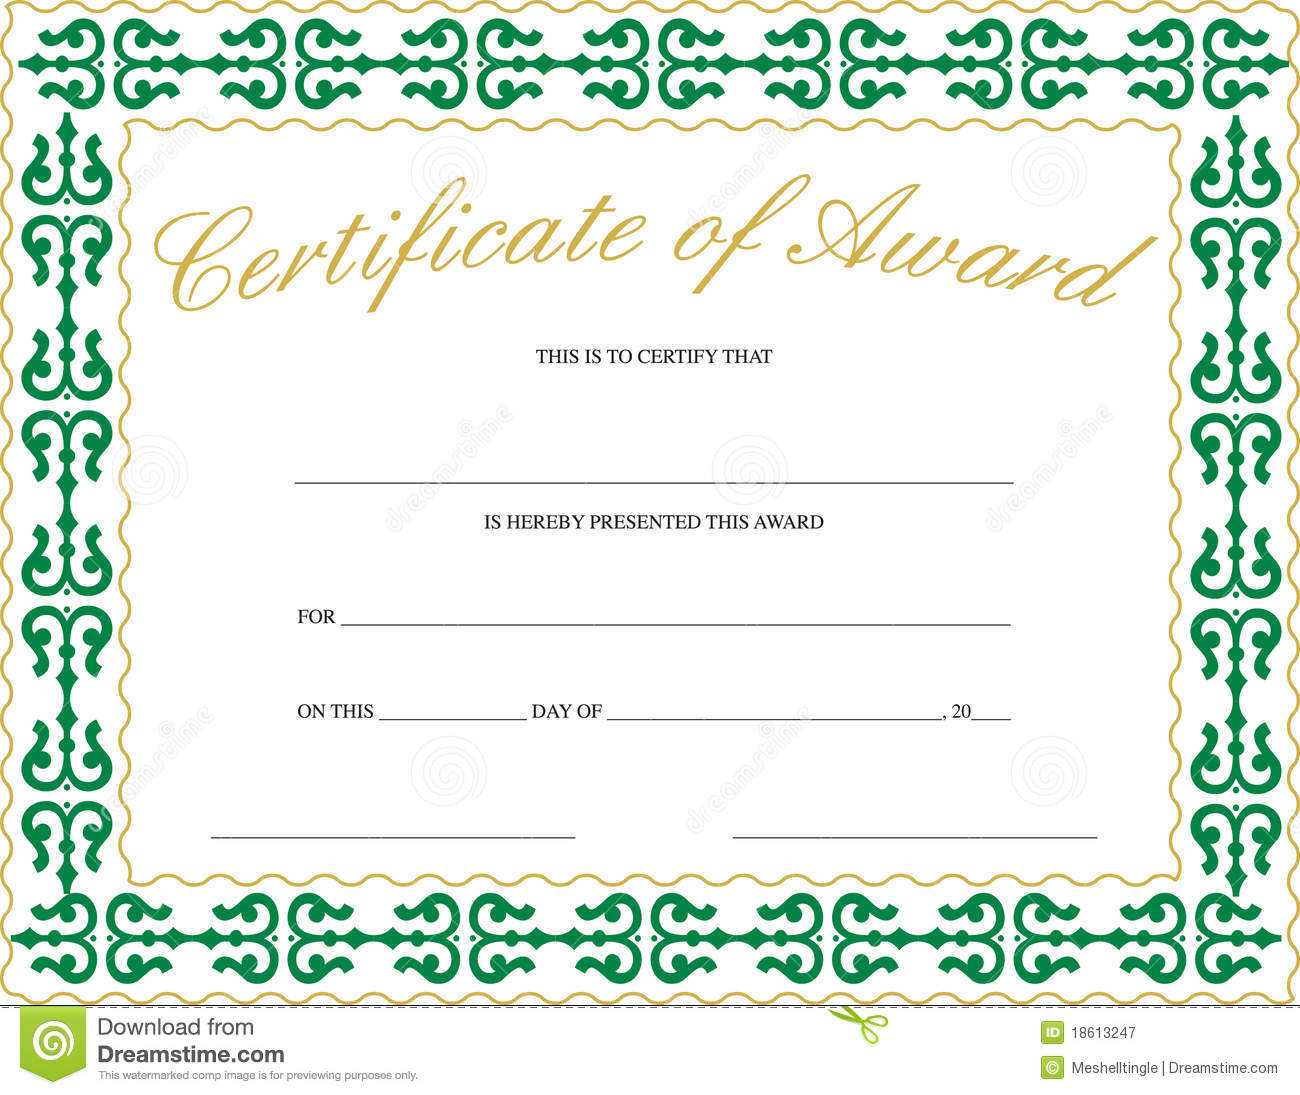 Certificate Of Award Stock Vector. Illustration Of Paper Throughout Referral Certificate Template